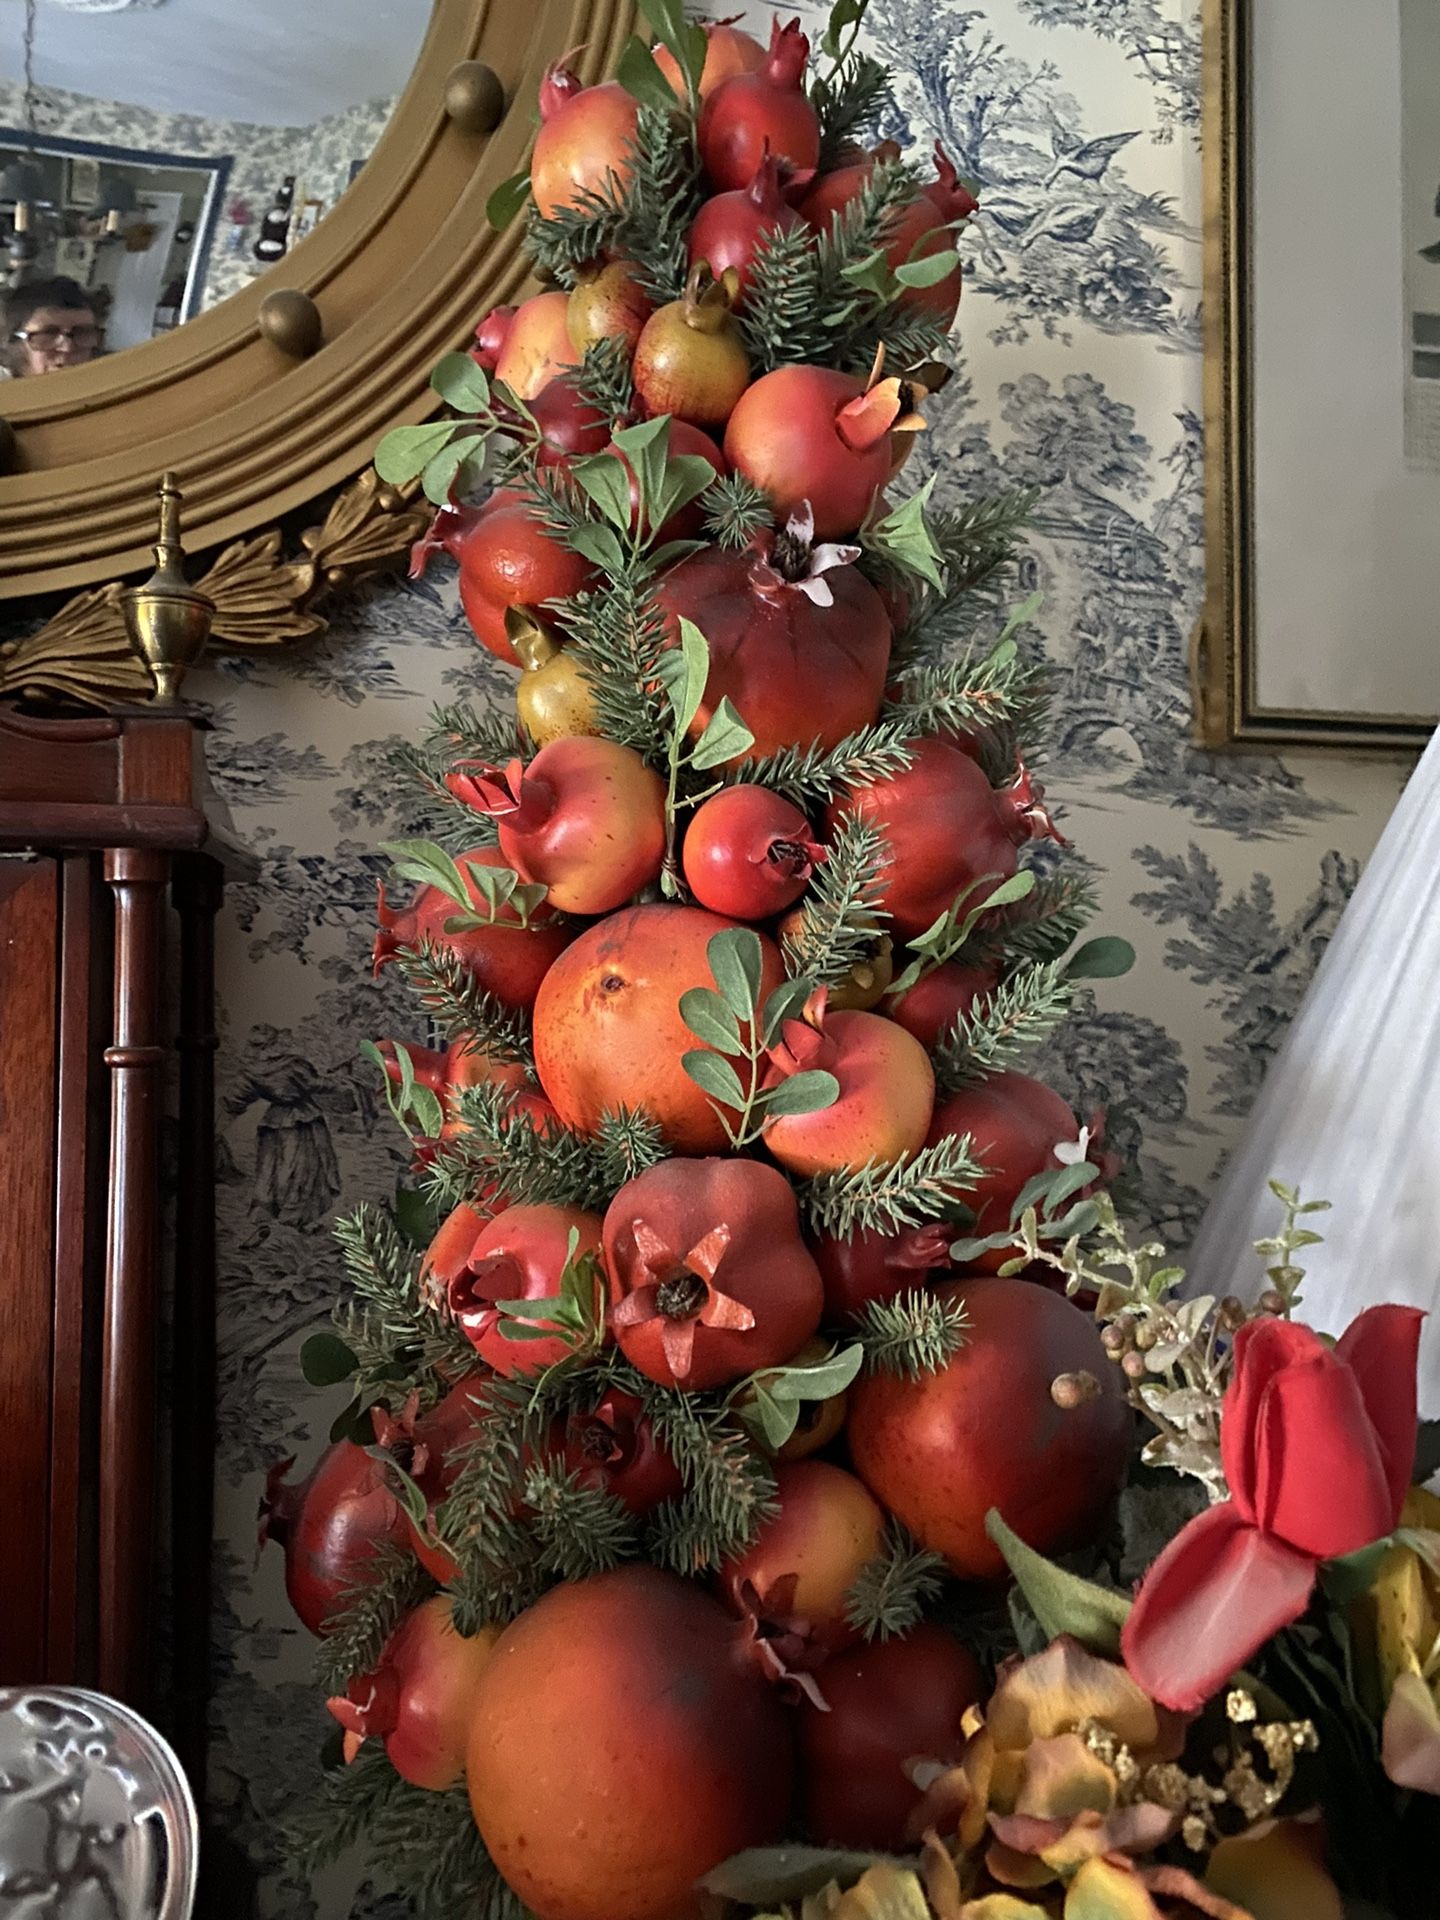 Beautiful Colonial Williamsburg Holiday Christmas Artificial Pomegranate Fruit Tree Topiary